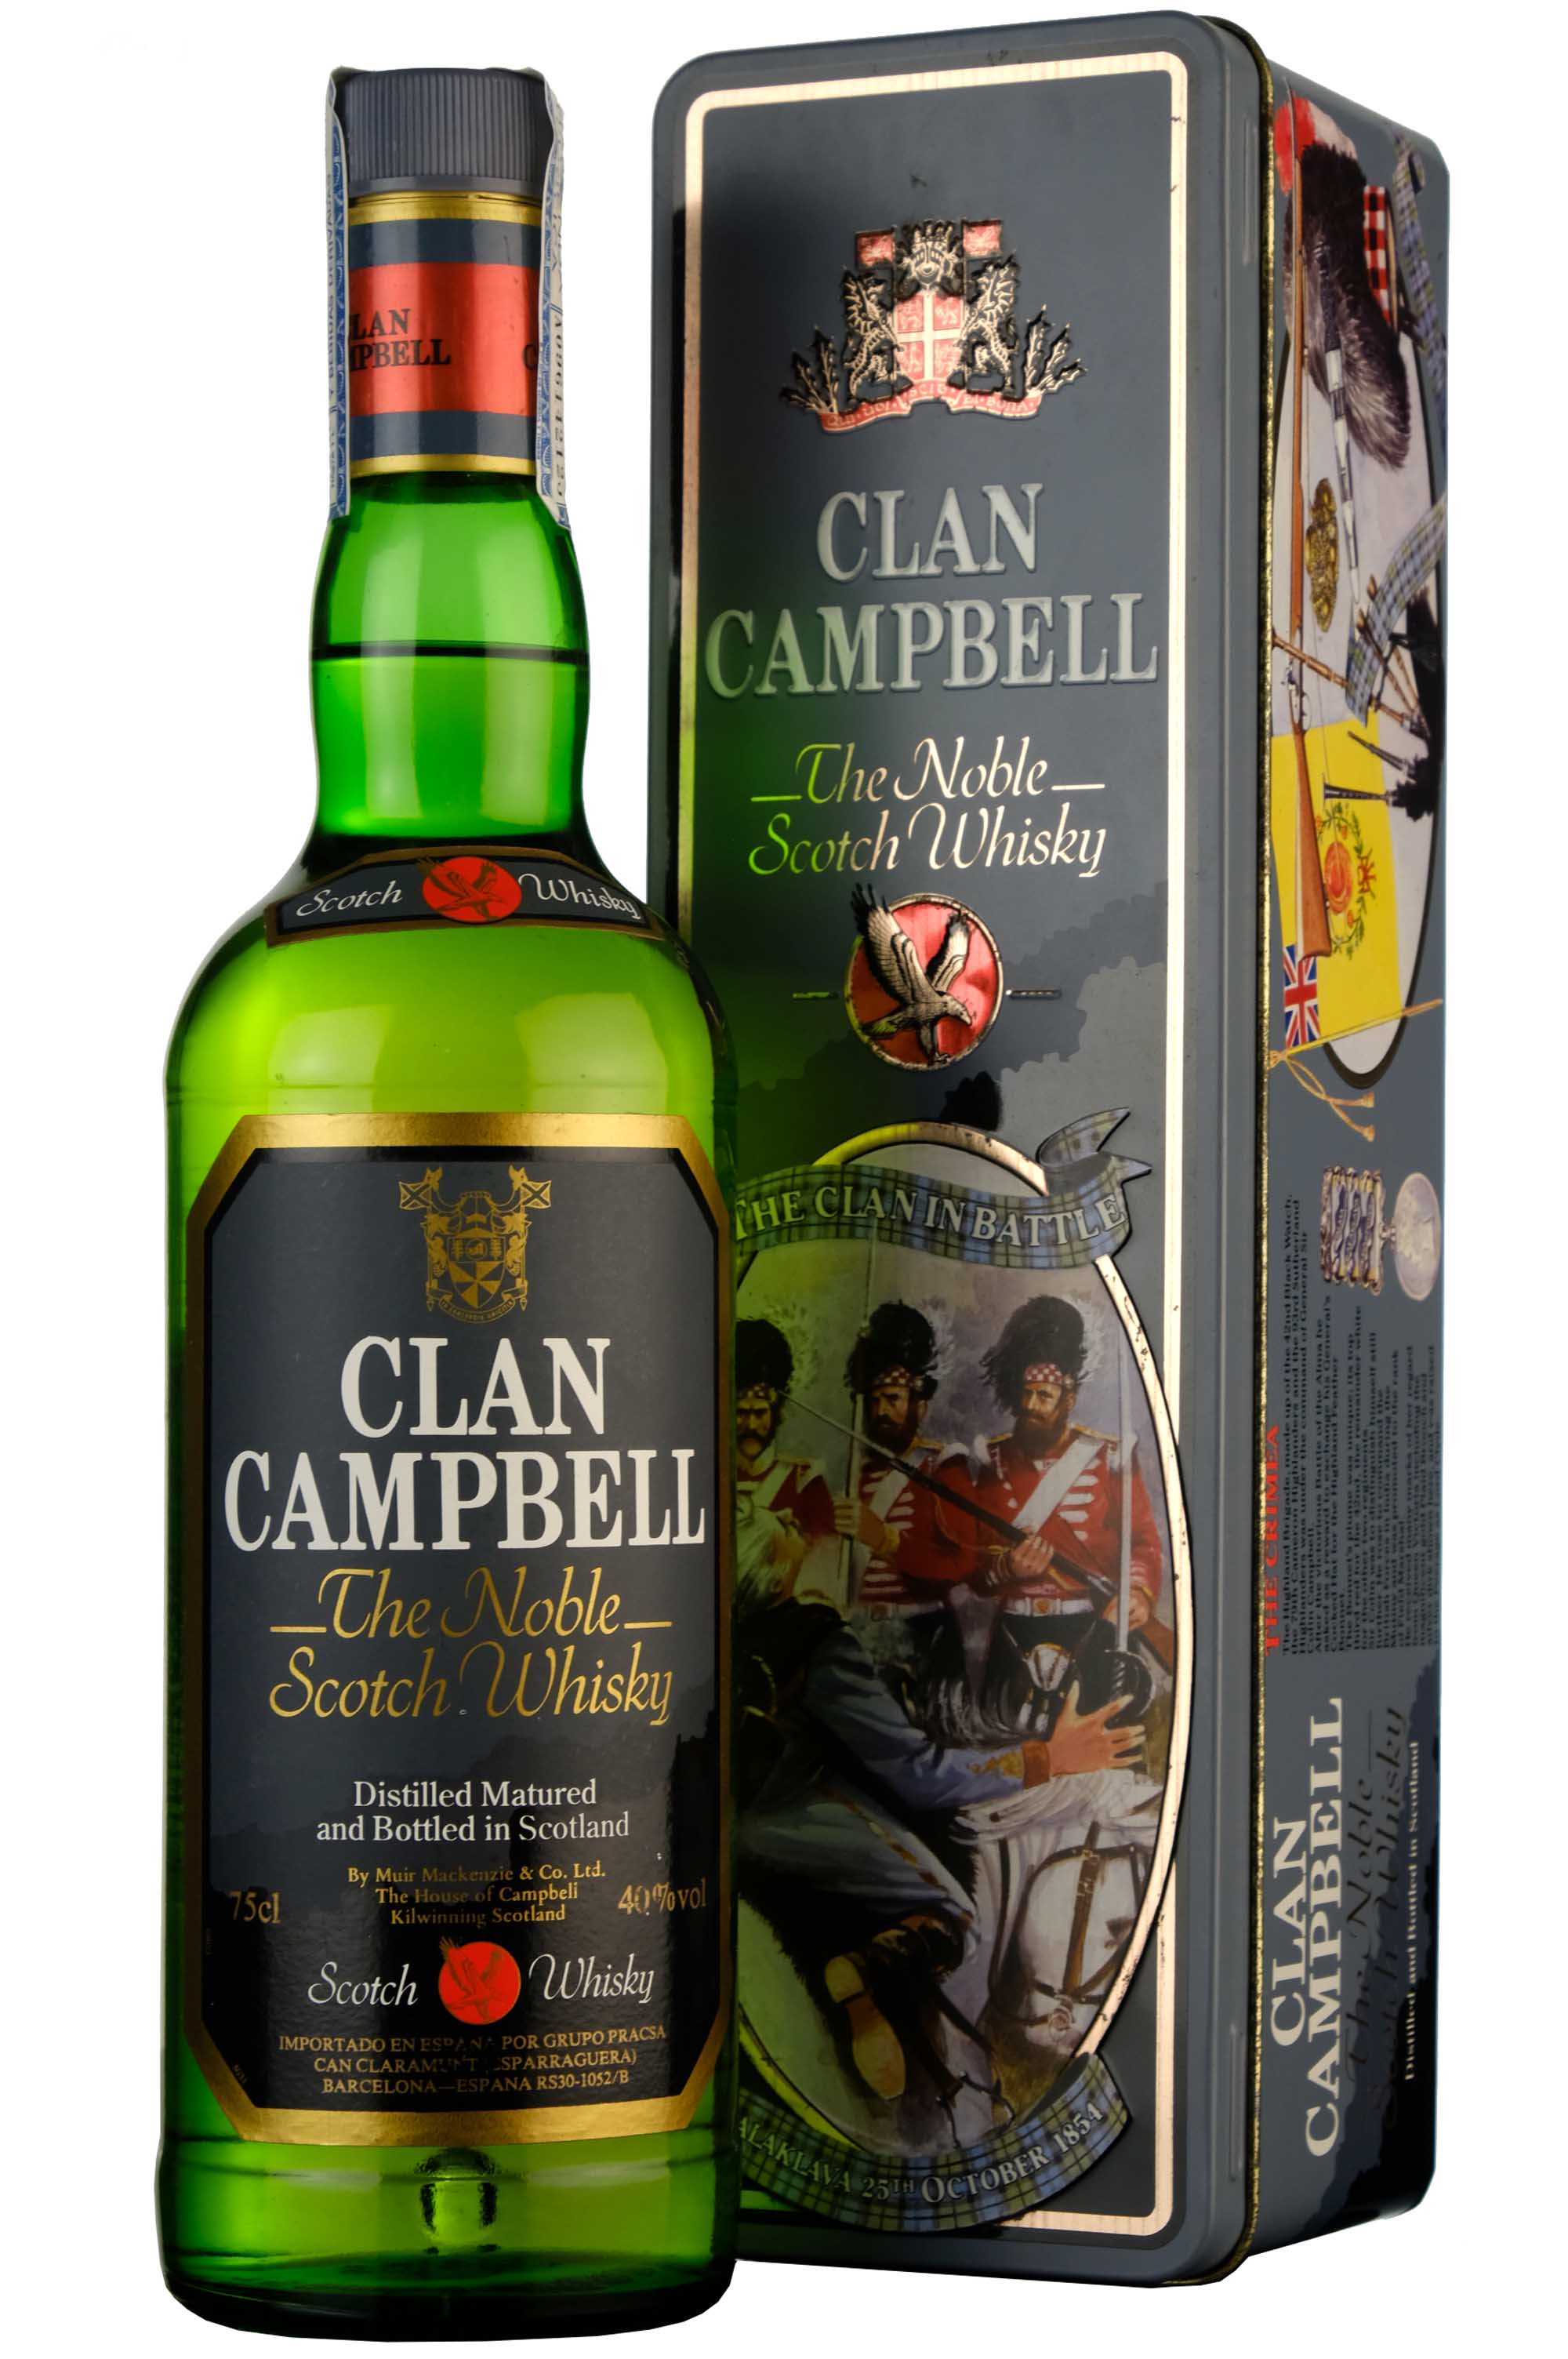 Clan Campbell The Noble Scotch Whisky 1980s